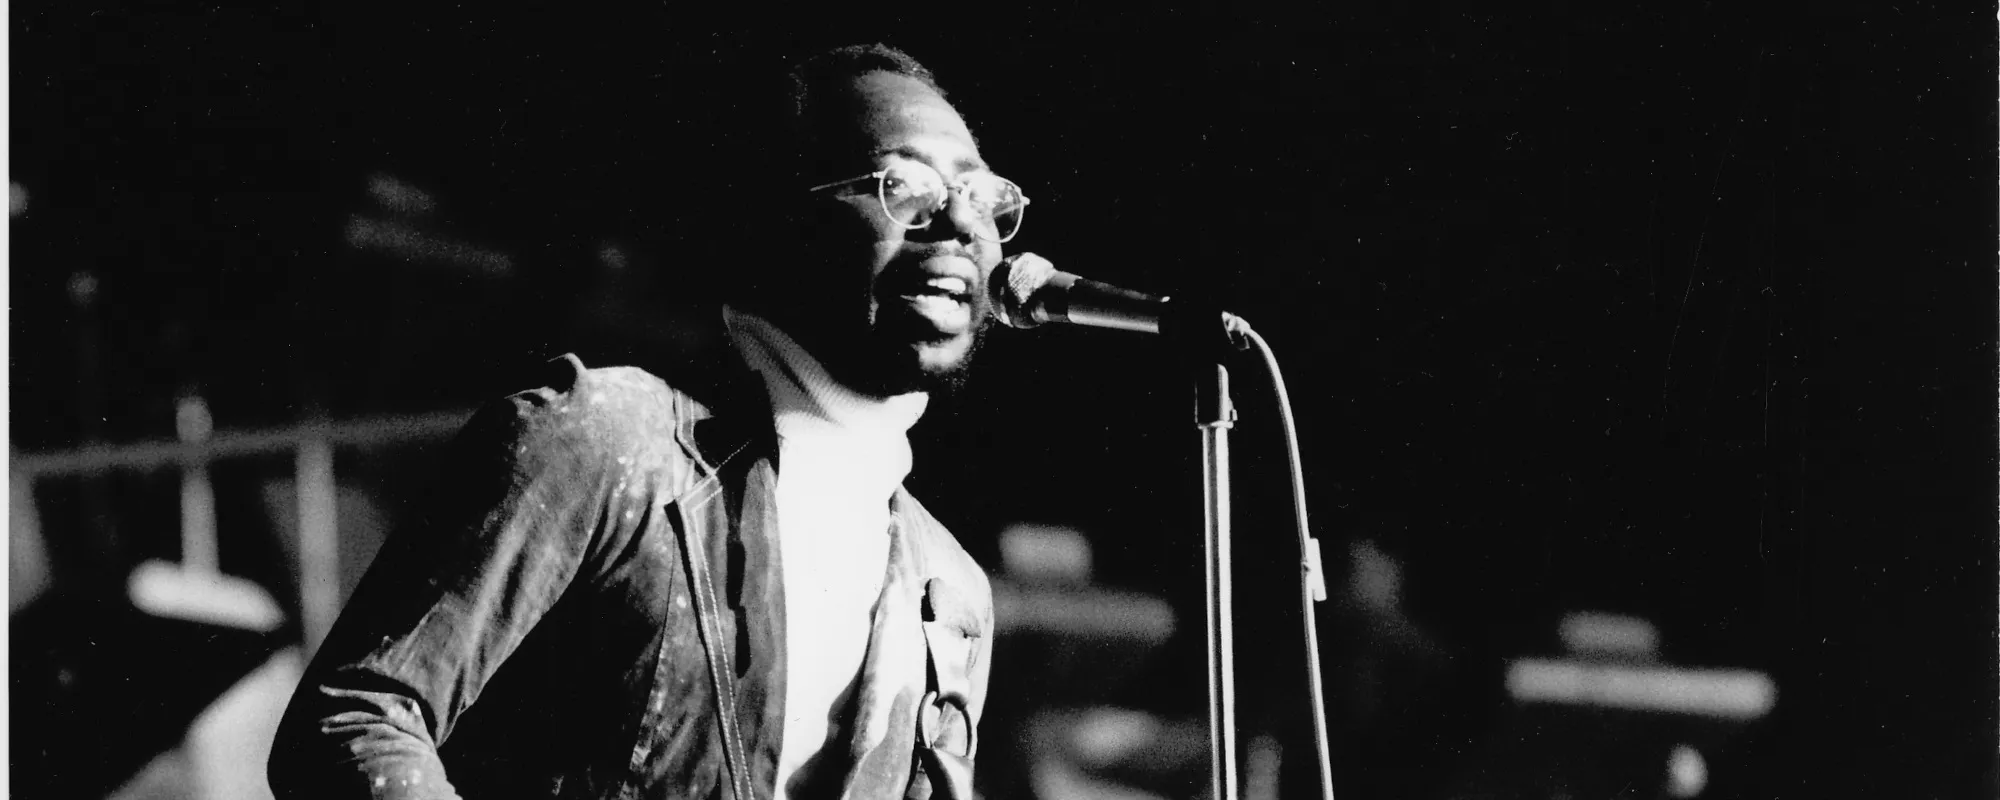 Top 10 Curtis Mayfield Songs